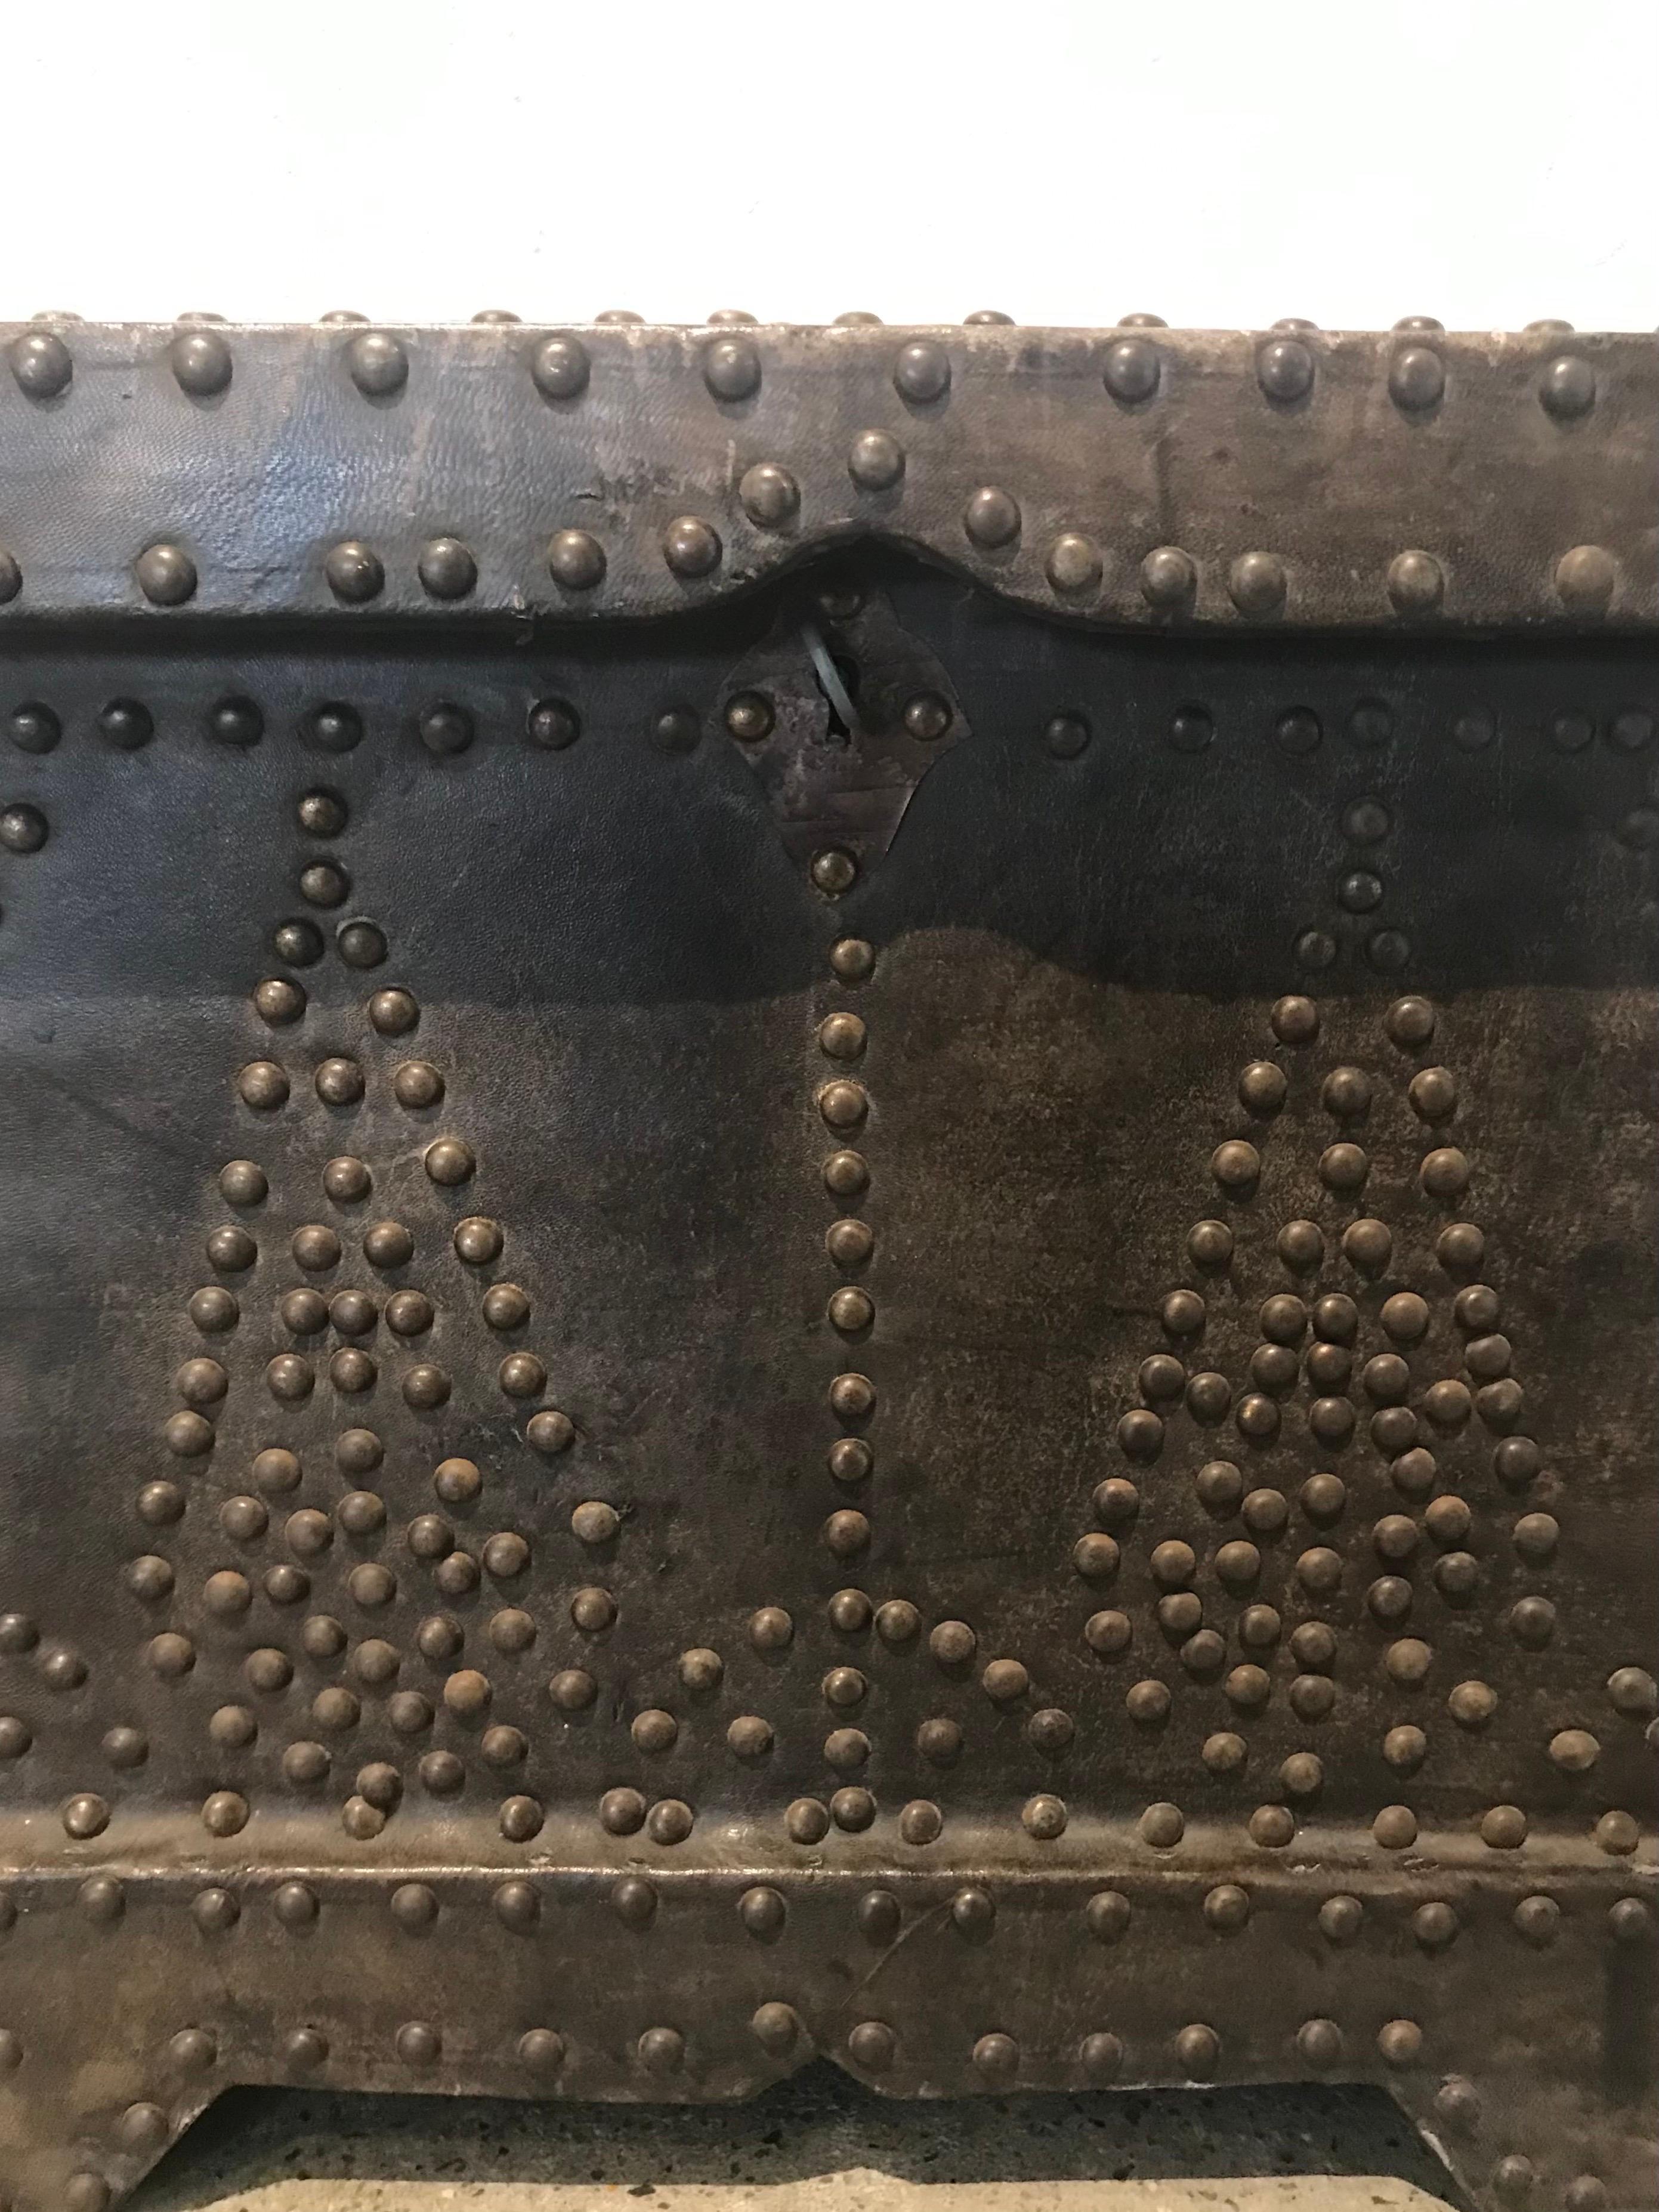 Handsome leather studded trunk with antique brass nailheads in a lovely motif.  Works well as a side table or object d'art.